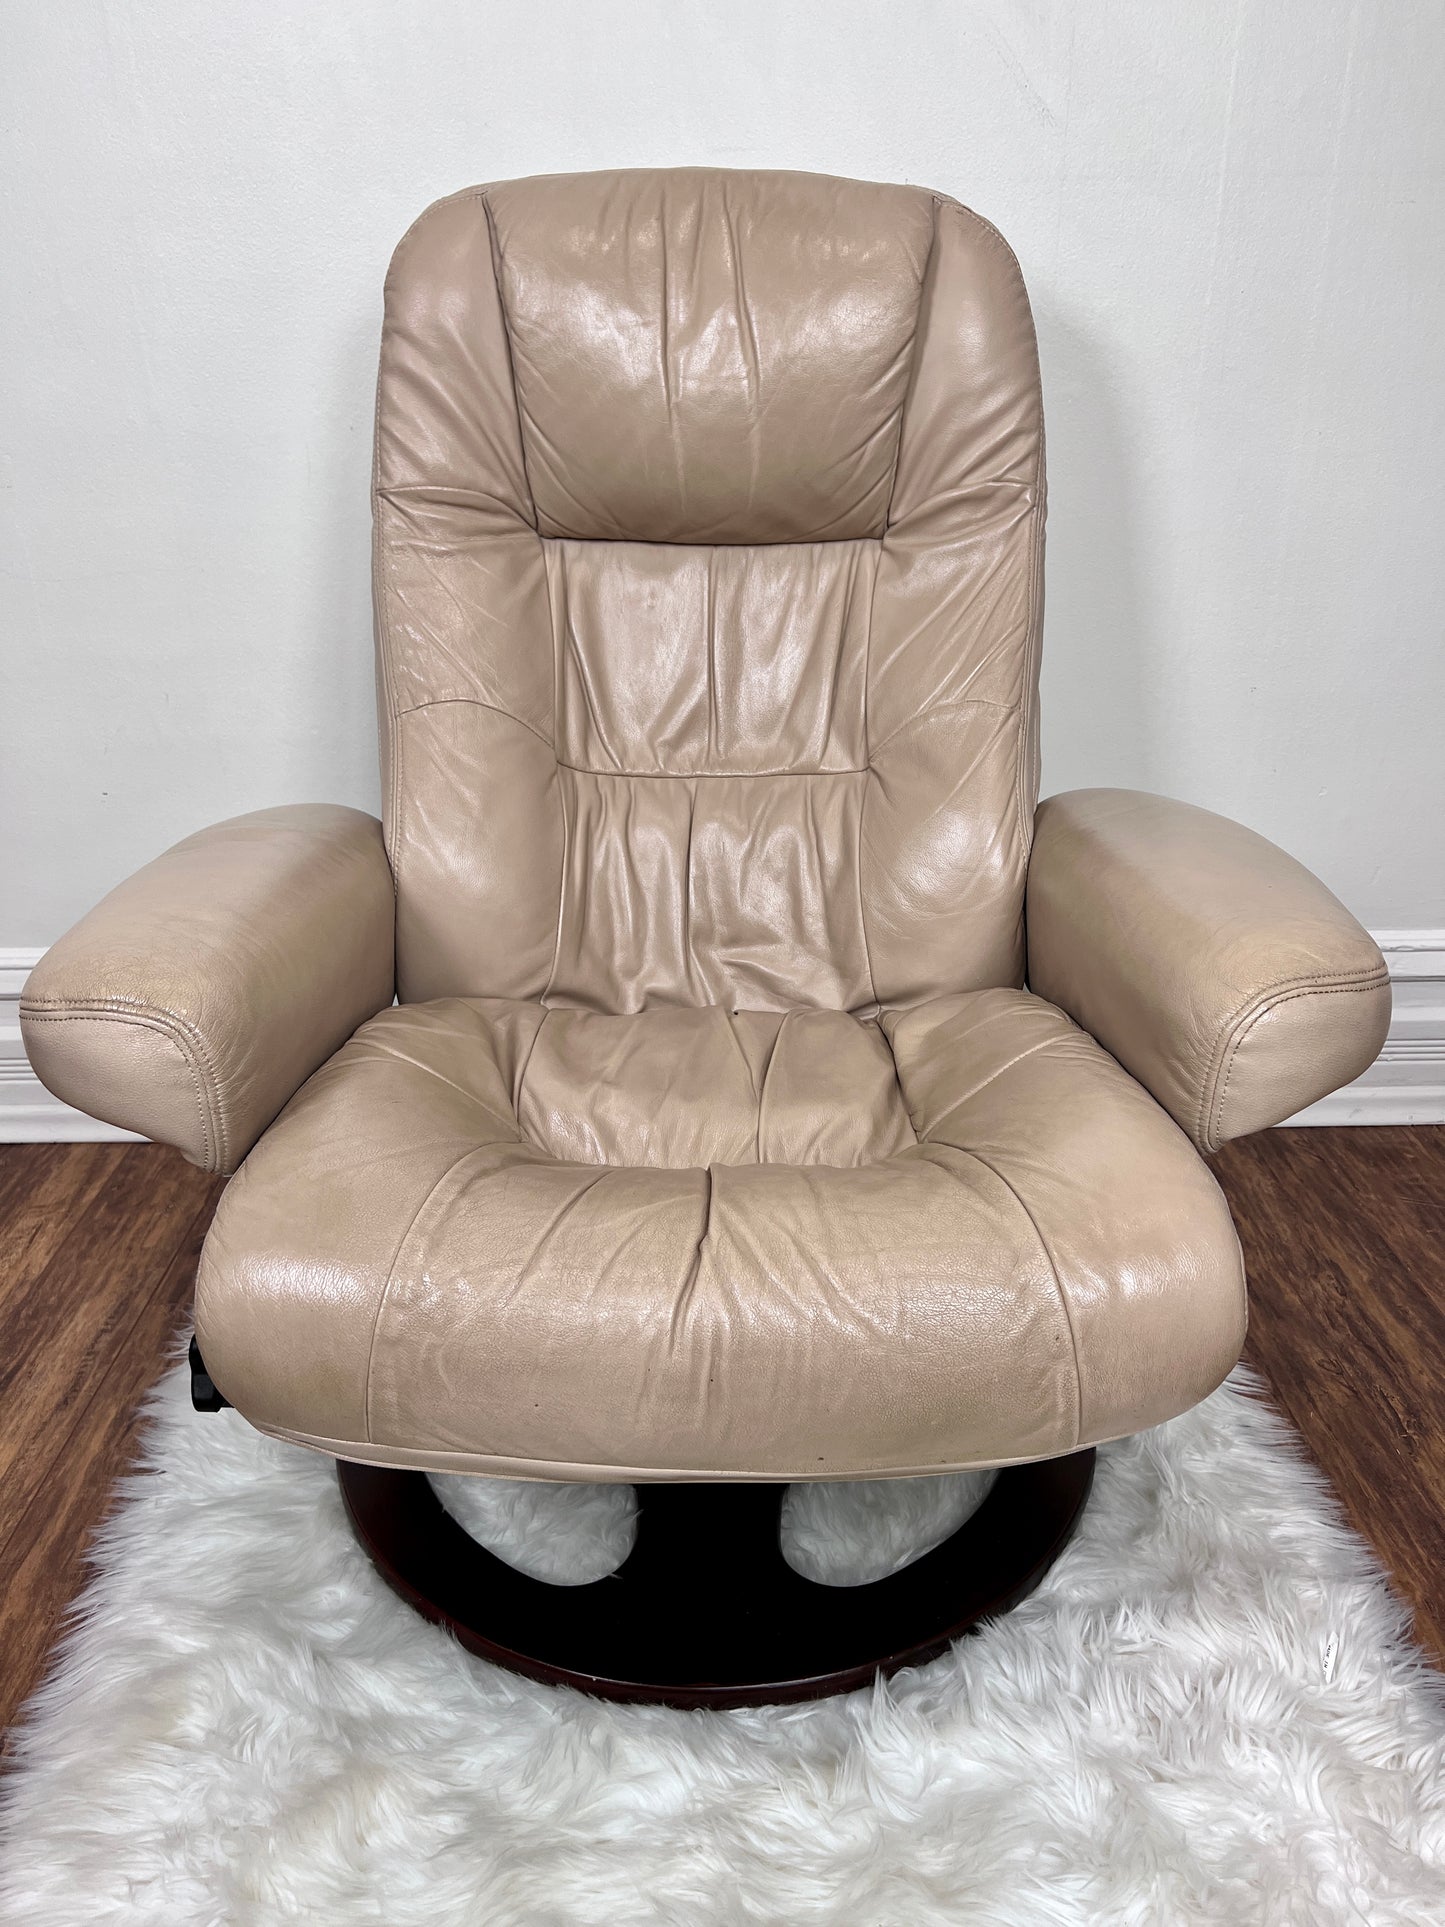 The Reginald Leather Chair & Ottoman